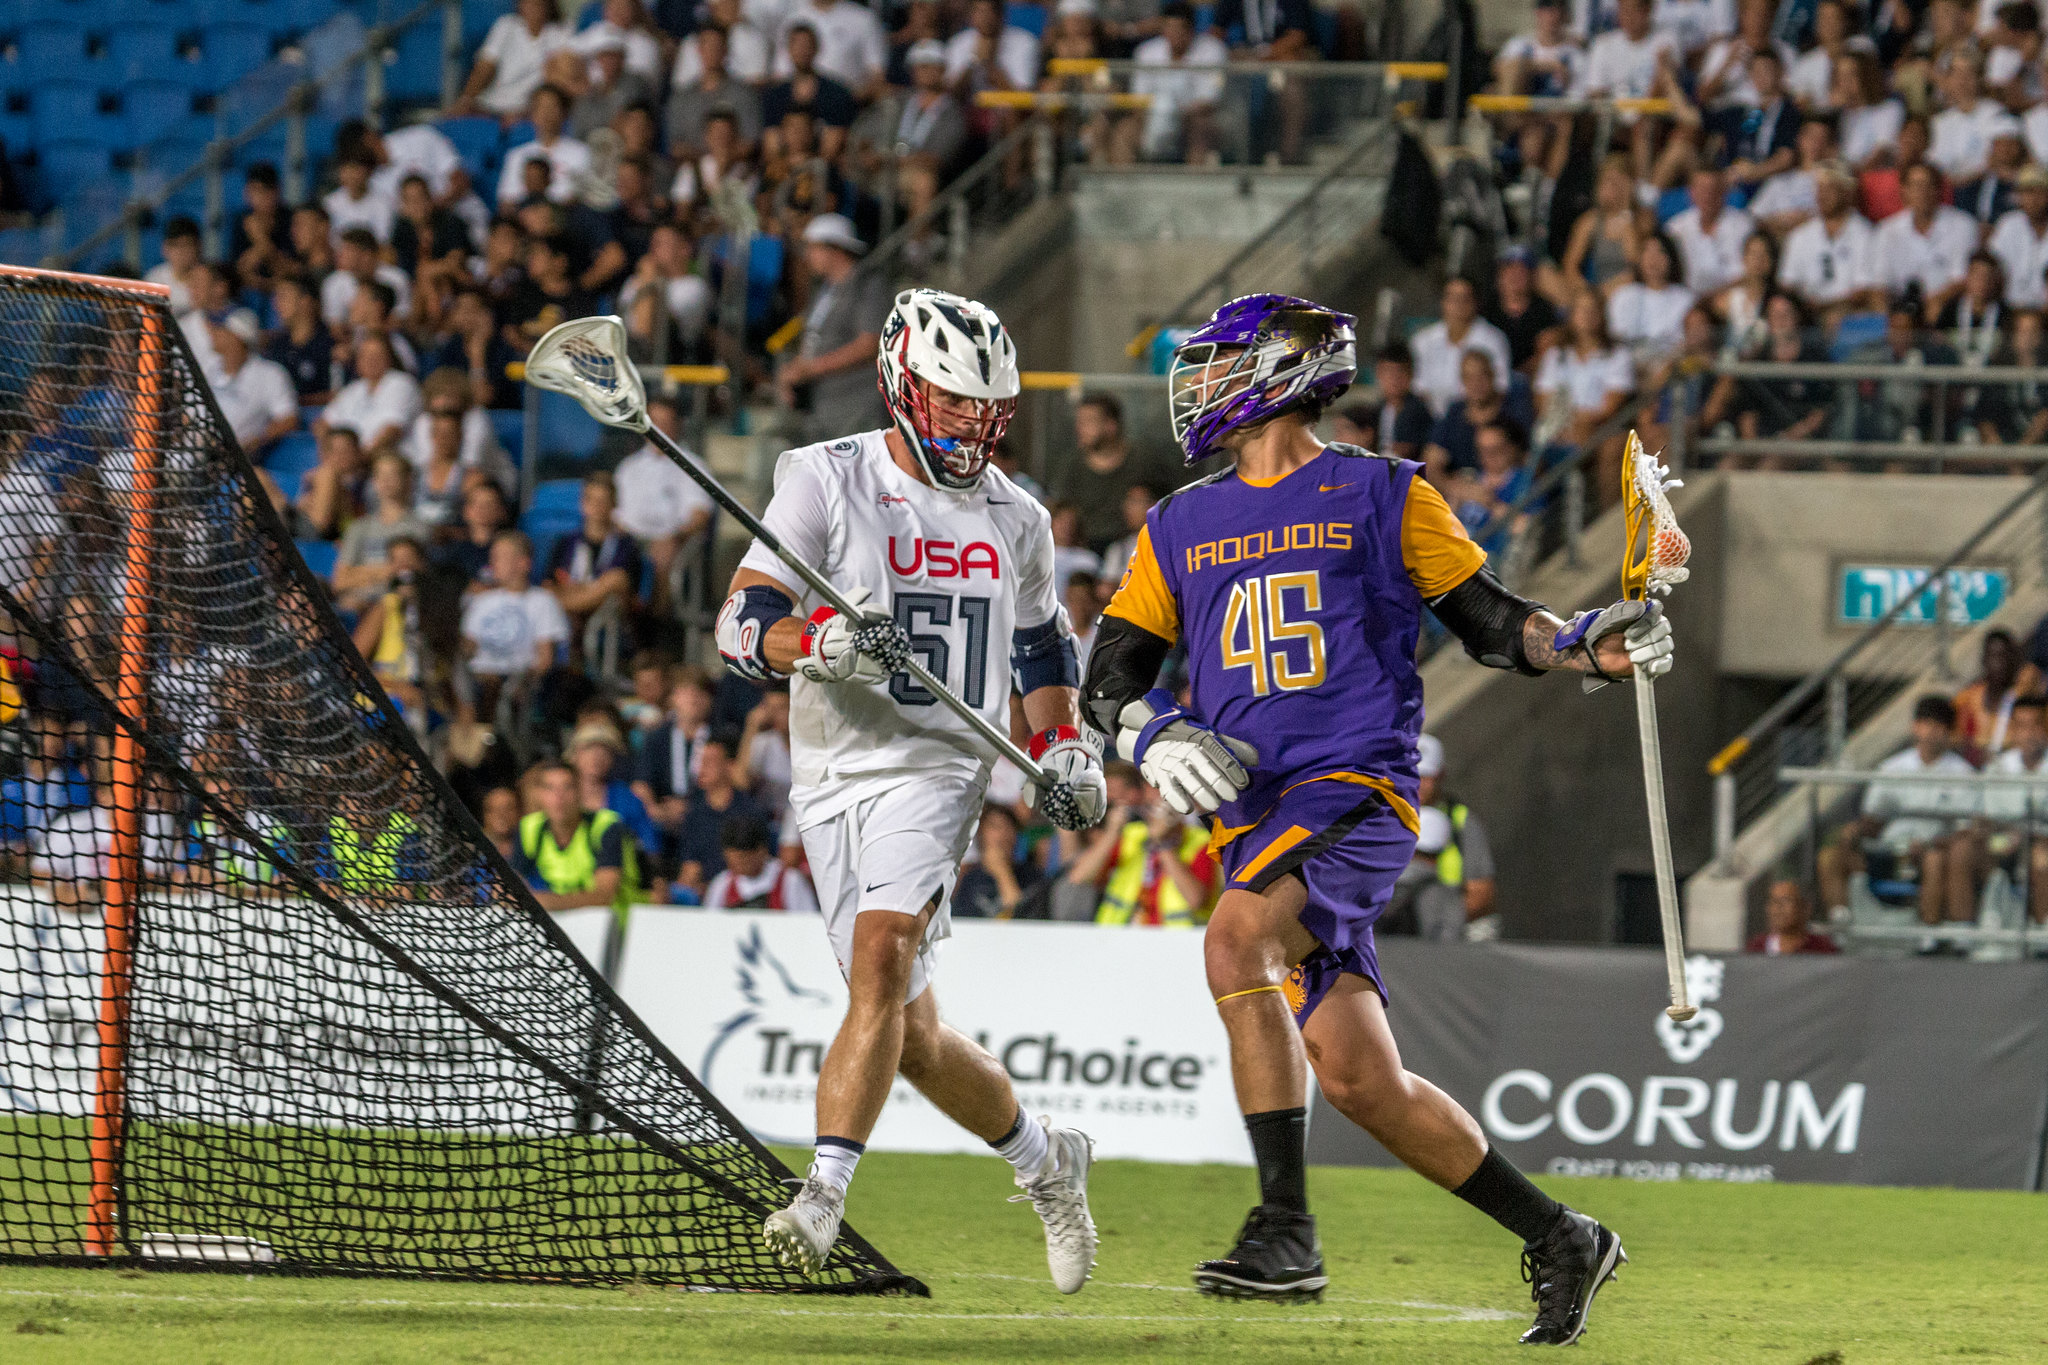 Lacrosse eyes place among the five rings with major partnerships announced for the upcoming cycle of world championships and The World Games 2022